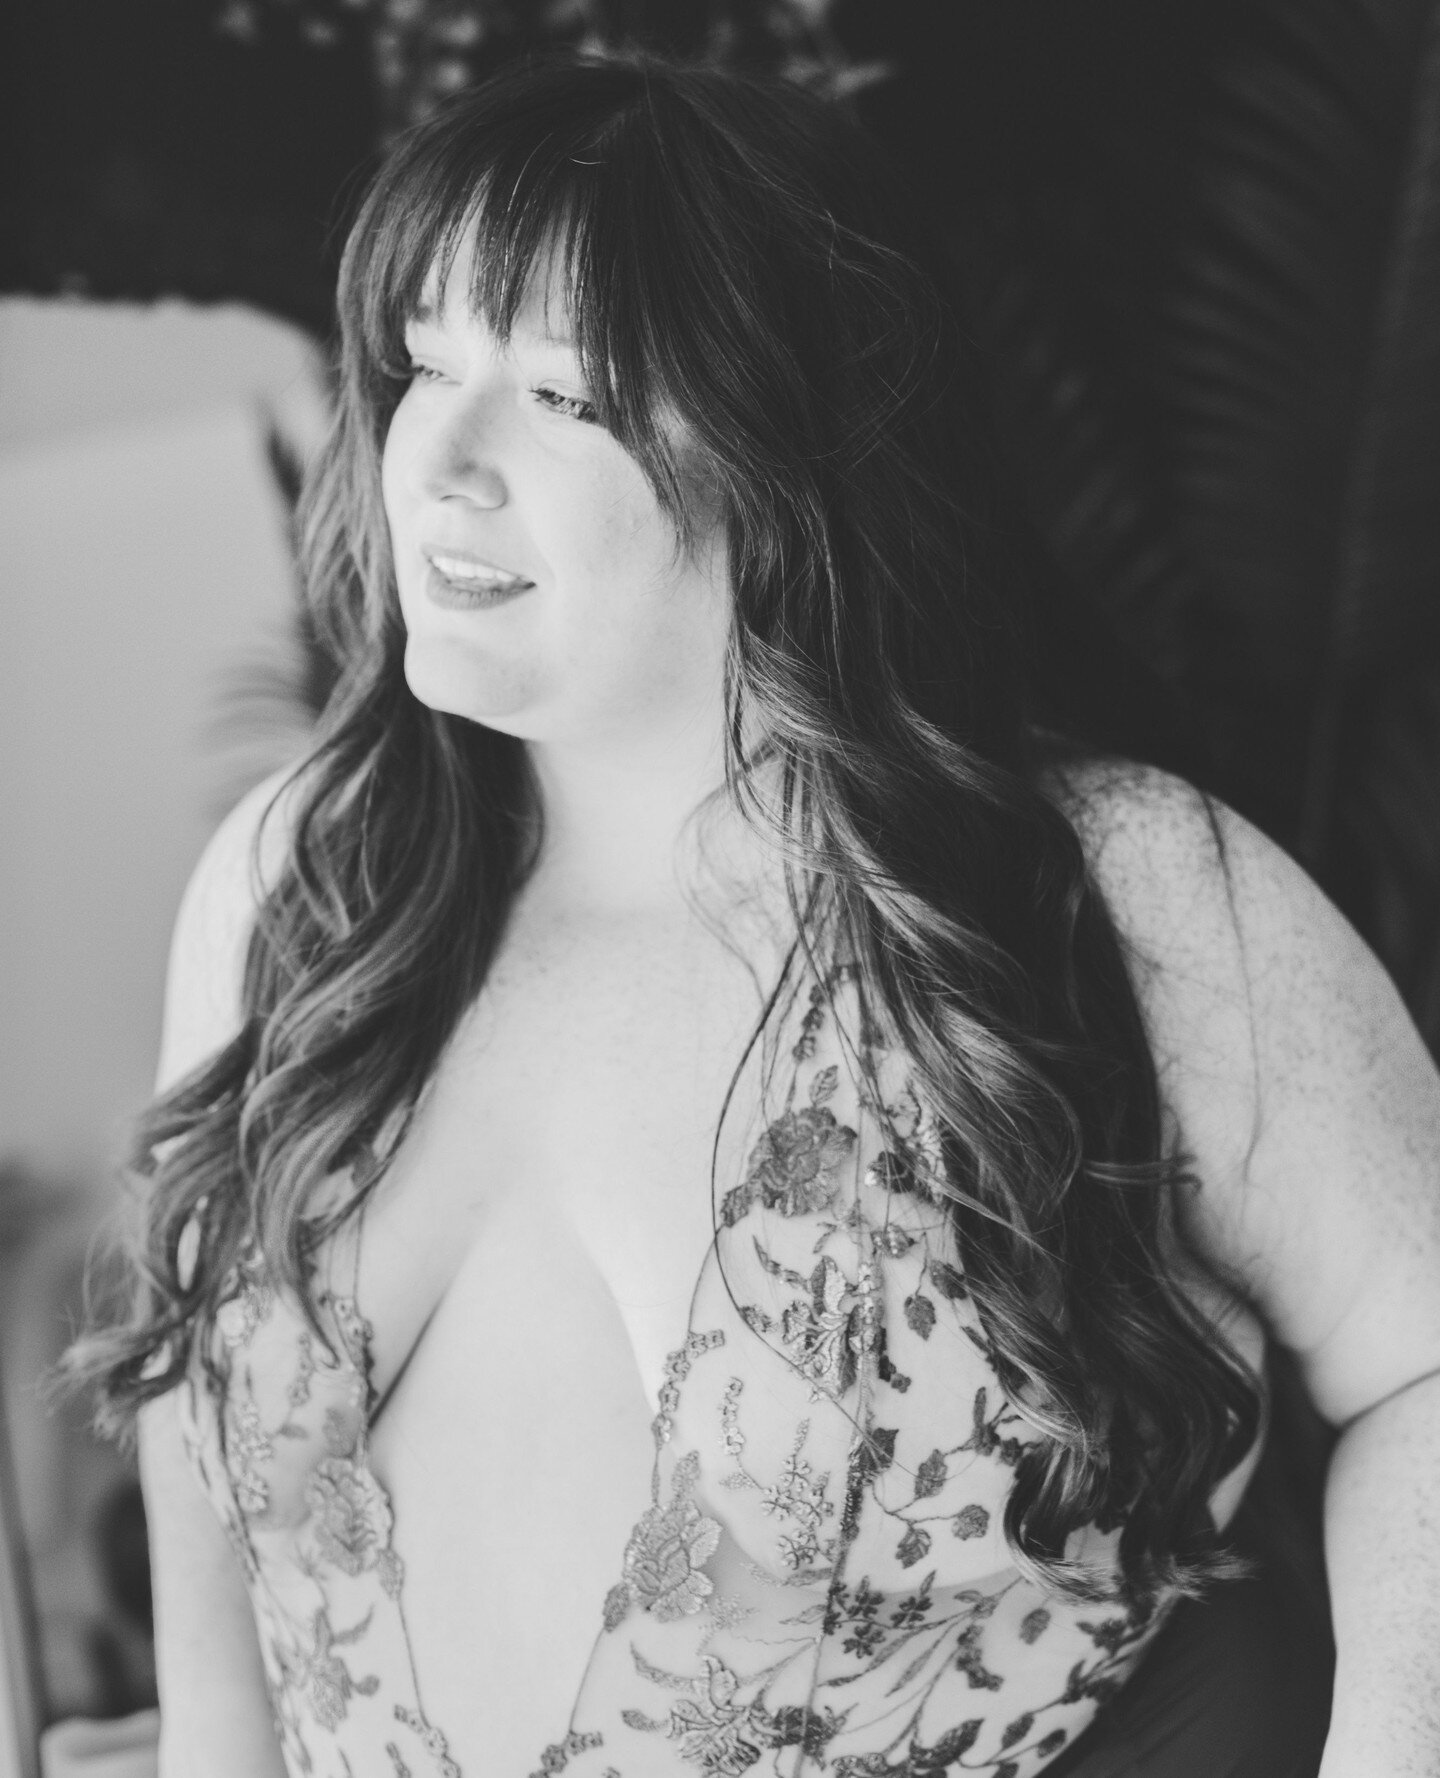 My plus size girlies... Raise your hand if you've ever felt this way...

It's me - your friendly neighborhood boudoir photographer coming at you from a vulnerable place, sharing this image of me in a bodysuit that I wouldn't have tried on 1yr ago.

I